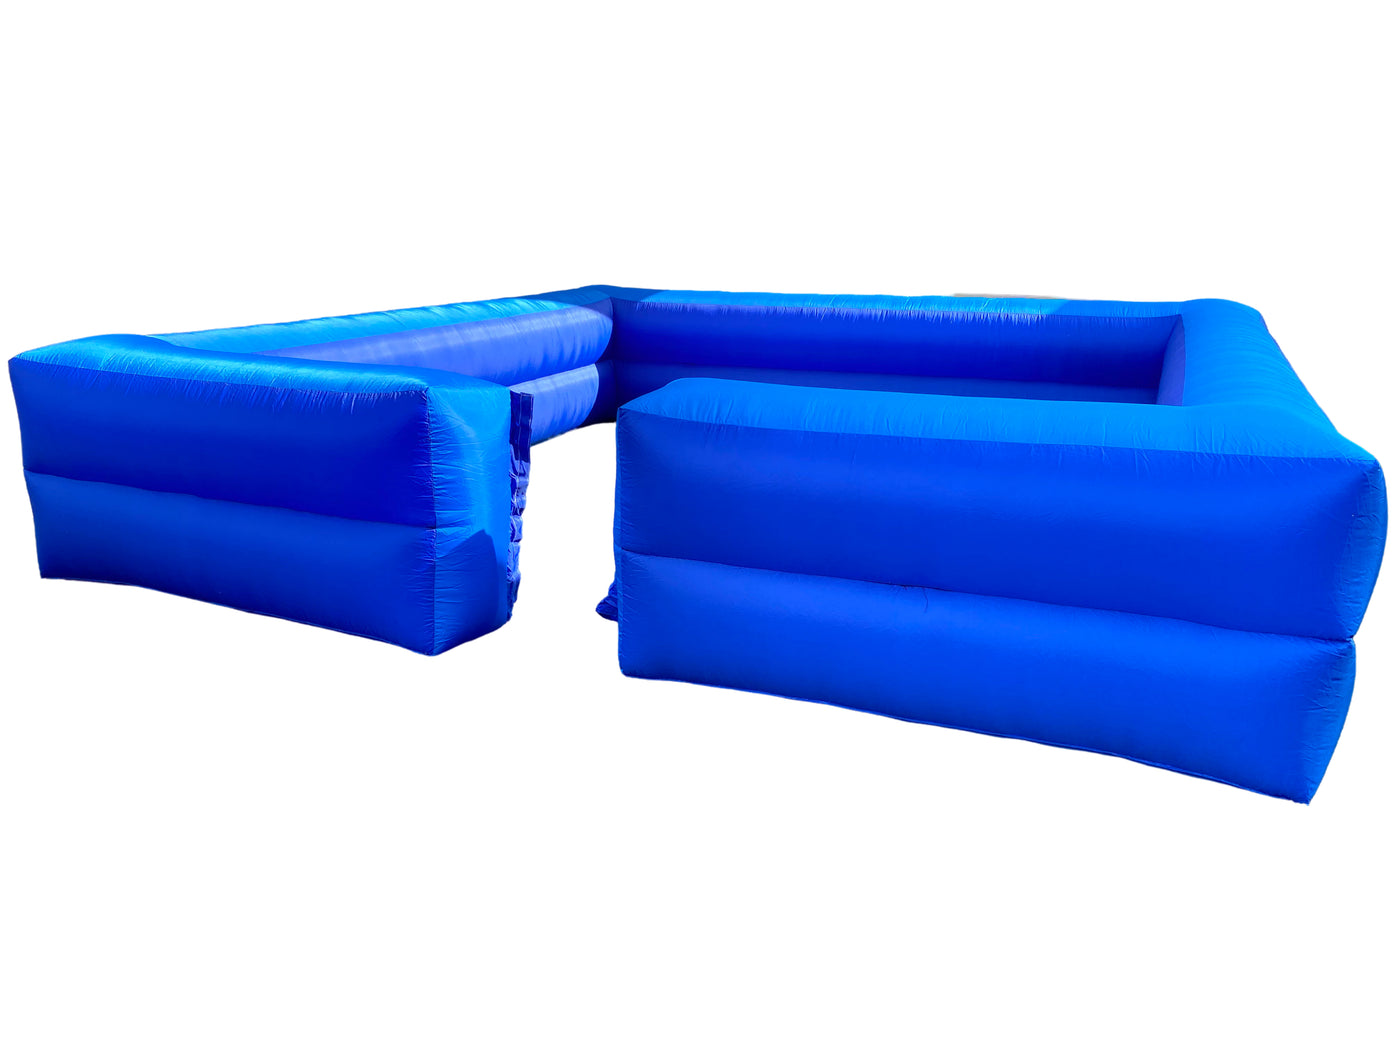 13 x 13 ft light weight foam containment pit